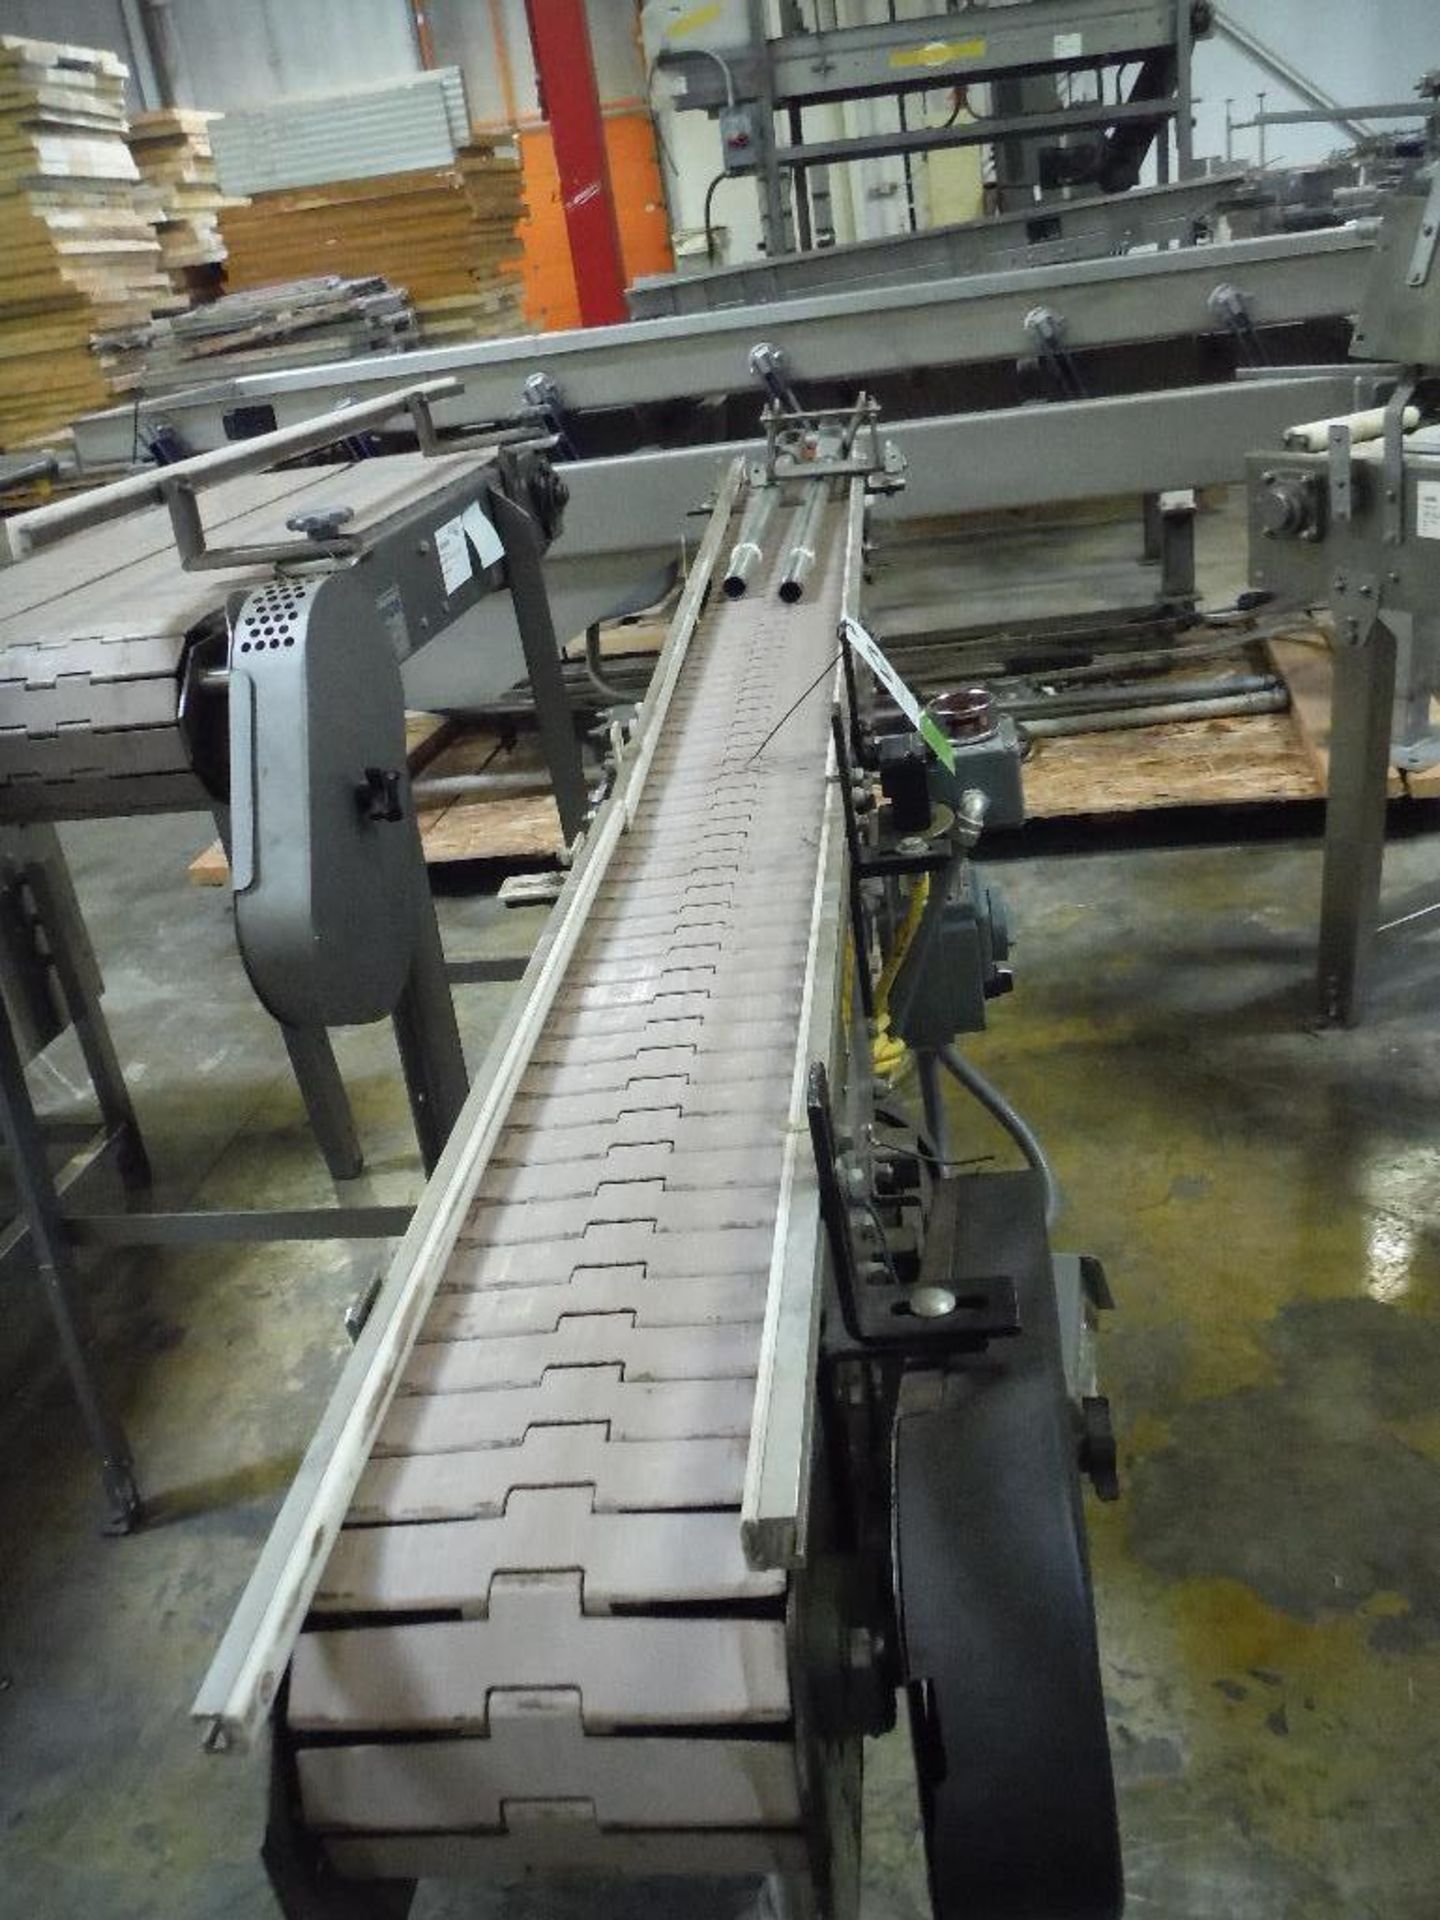 Nercon dual conveyor, table top belt, 64 in. long x overall 18 in. wide belts, missing motor and dri - Image 4 of 11